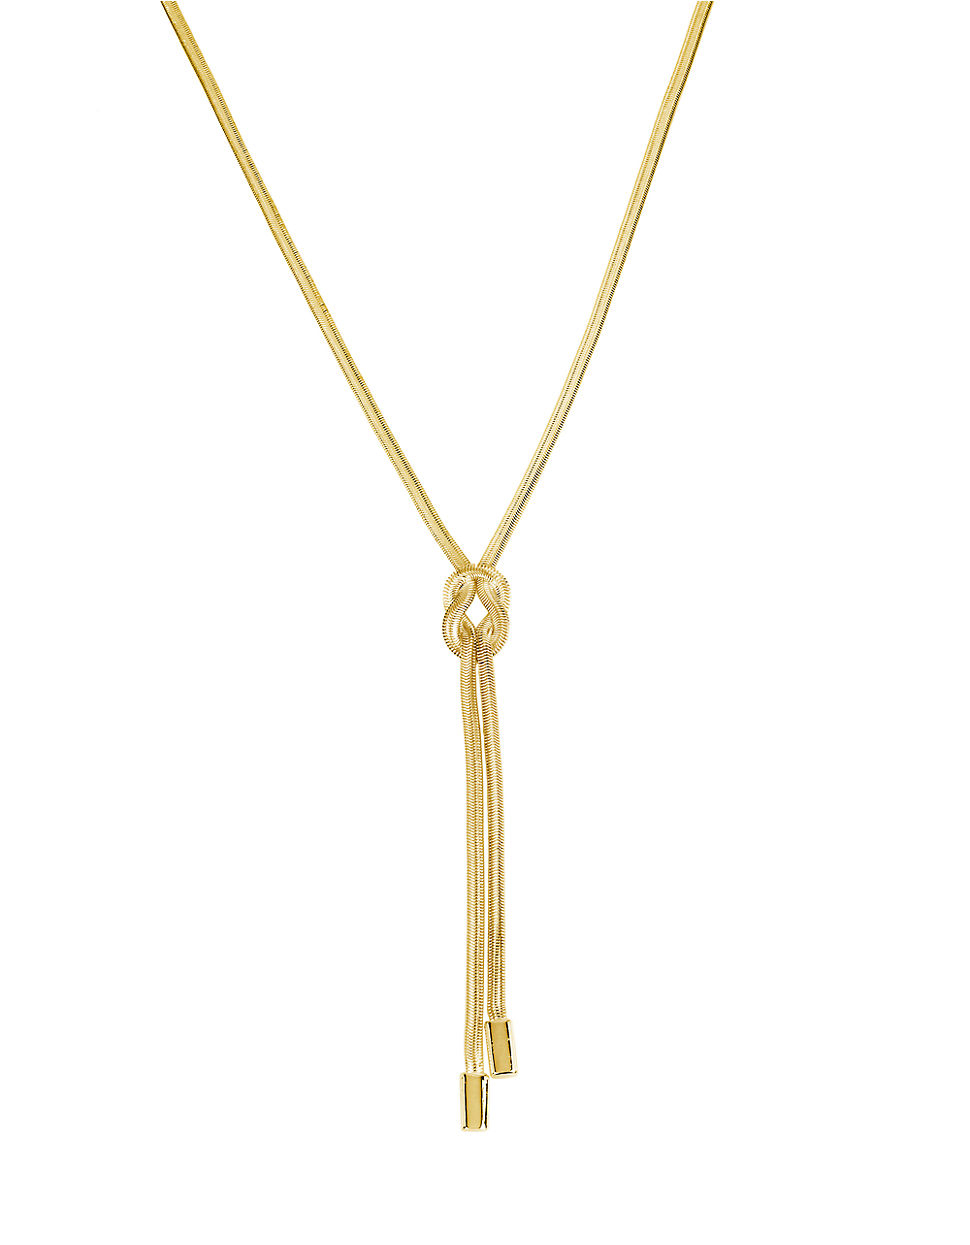 Lyst - Kenneth Cole Y-chain Knotted Necklace in Metallic